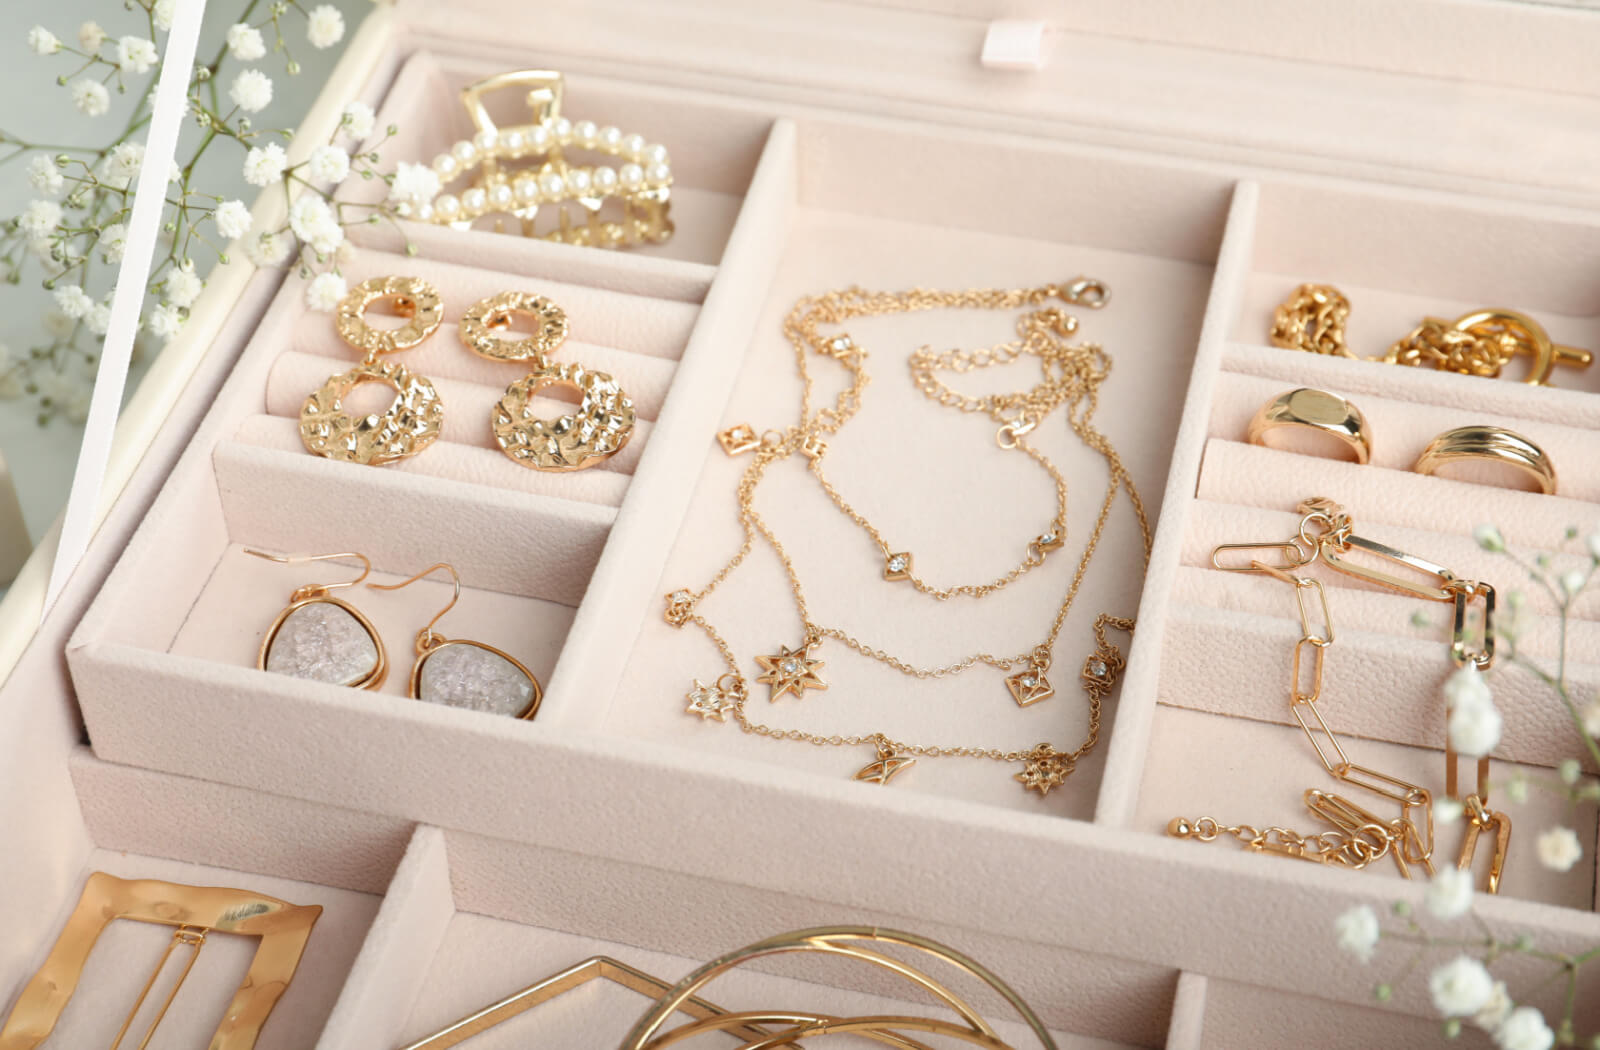 A collection of various jewelry including rings and necklaces in a jewelry box.